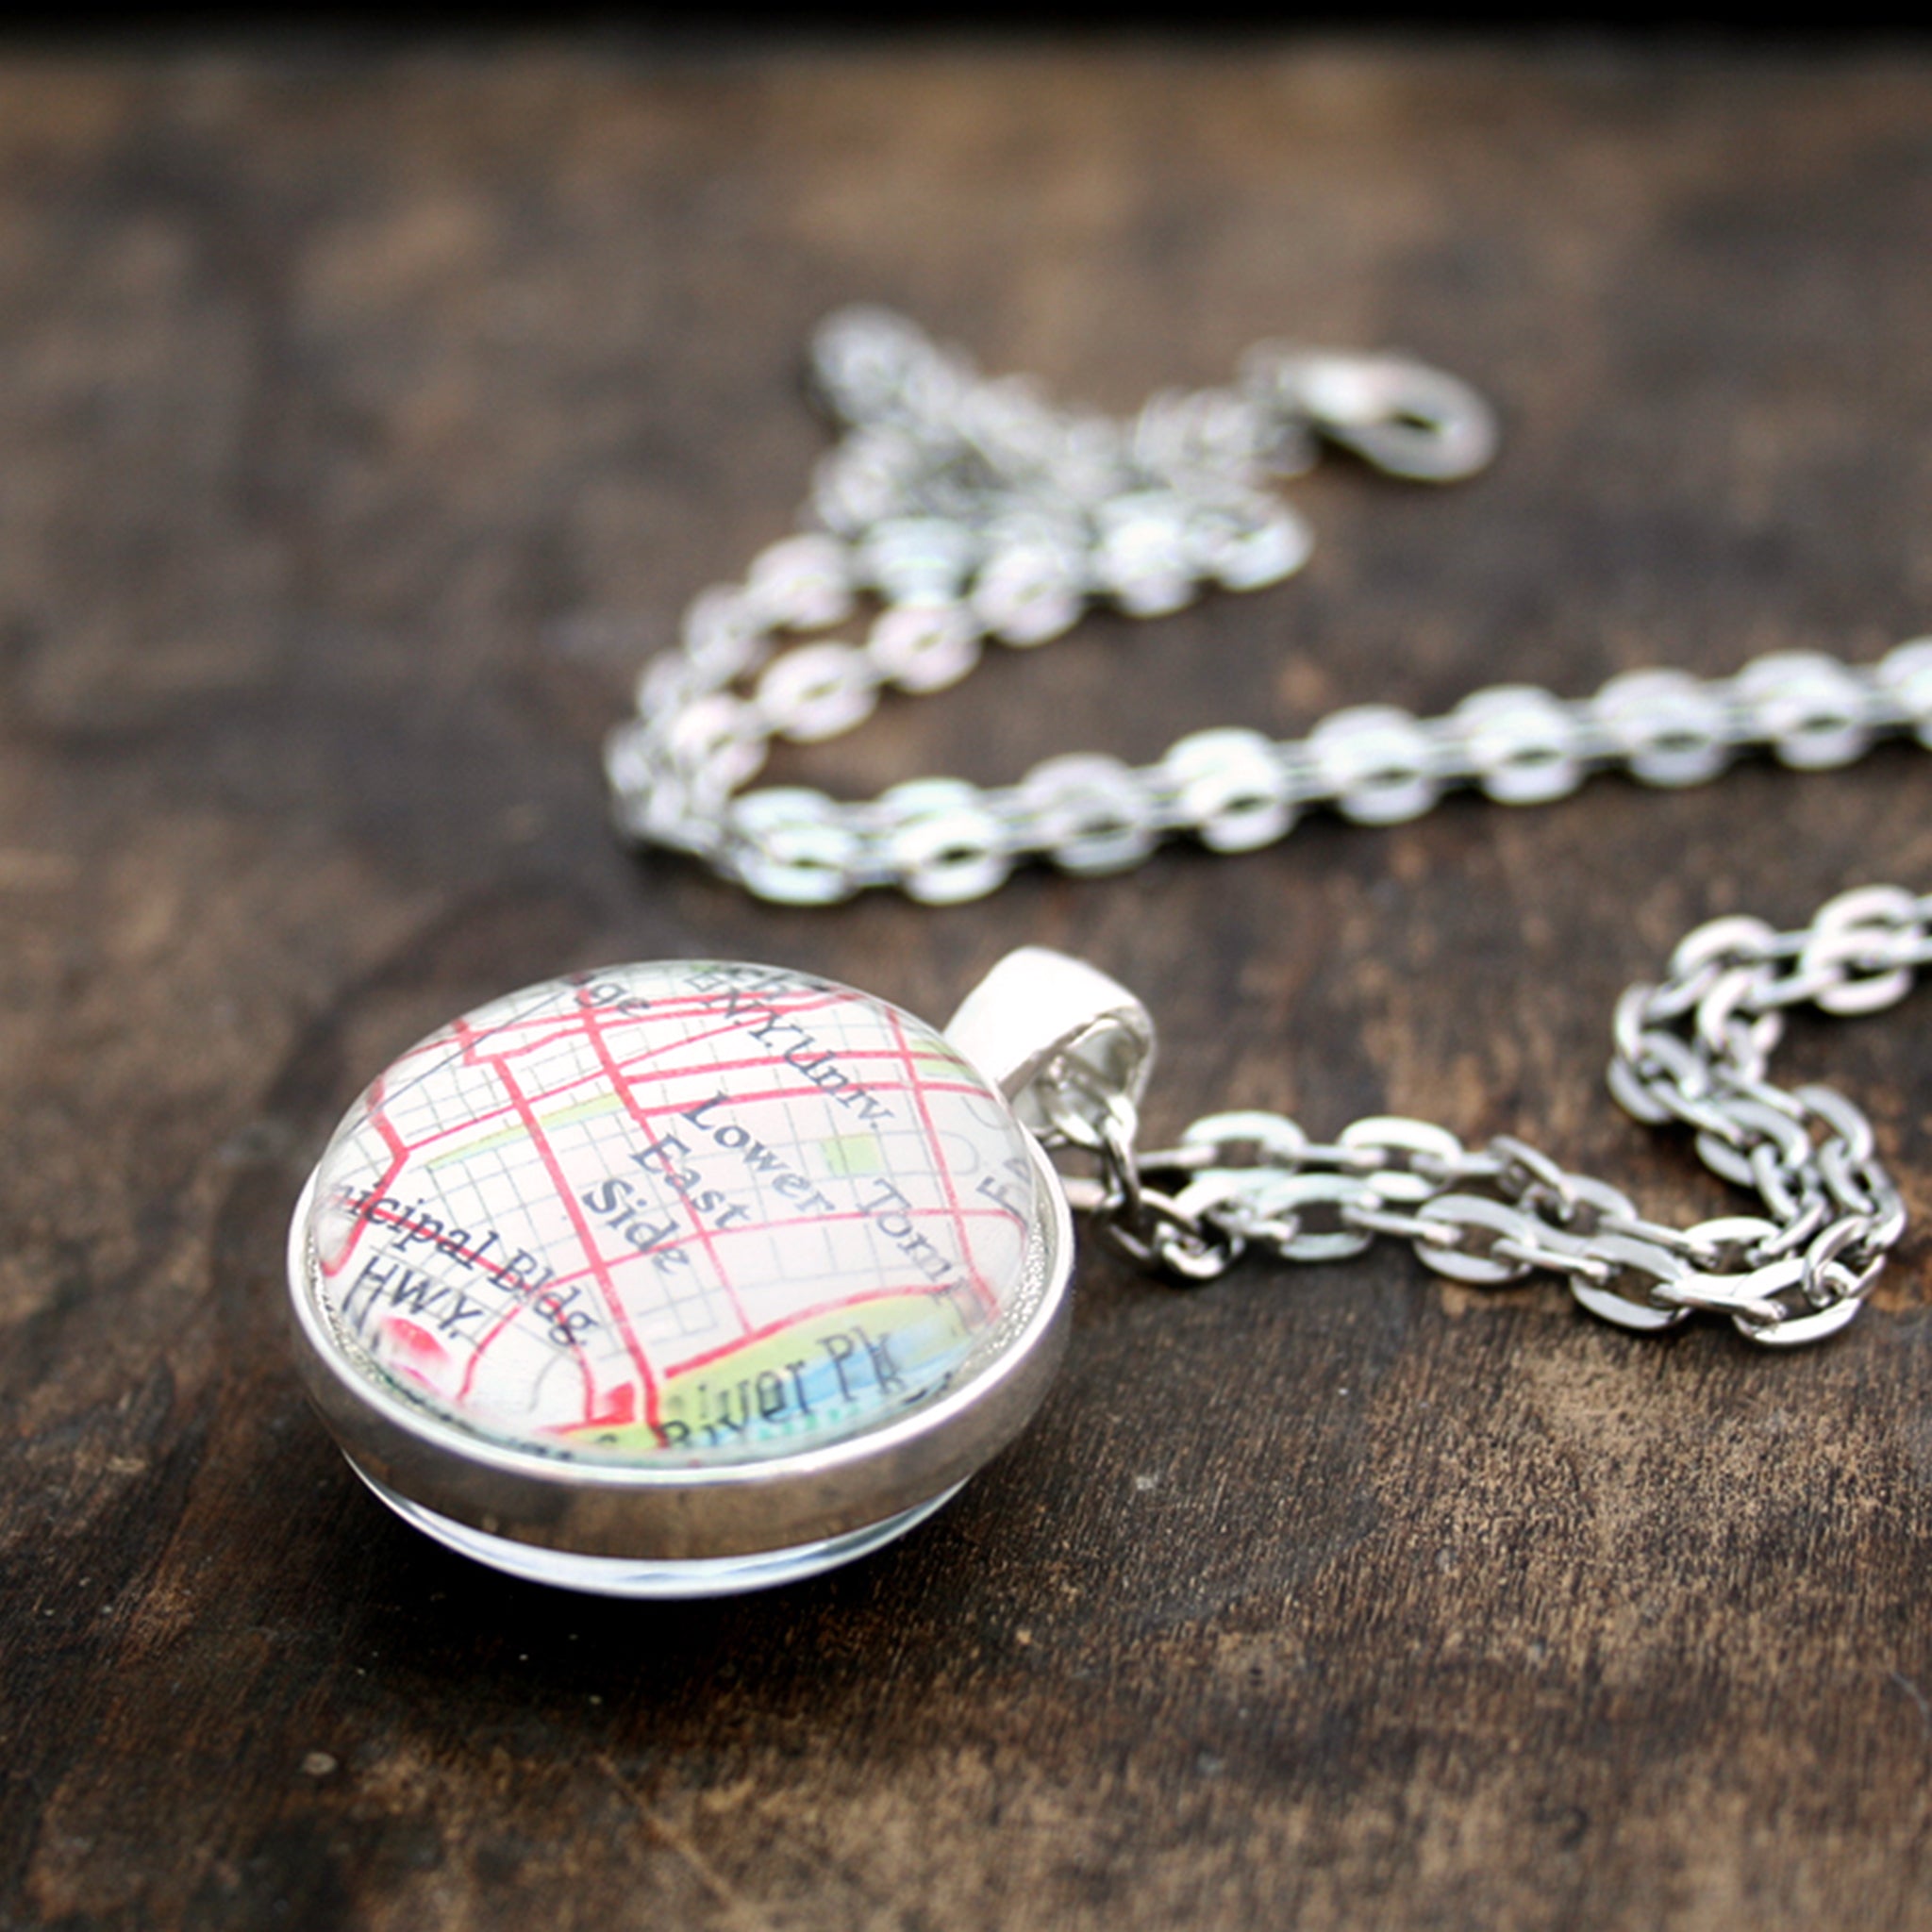 Silver tone double sided pendant necklace featuring map of New York City